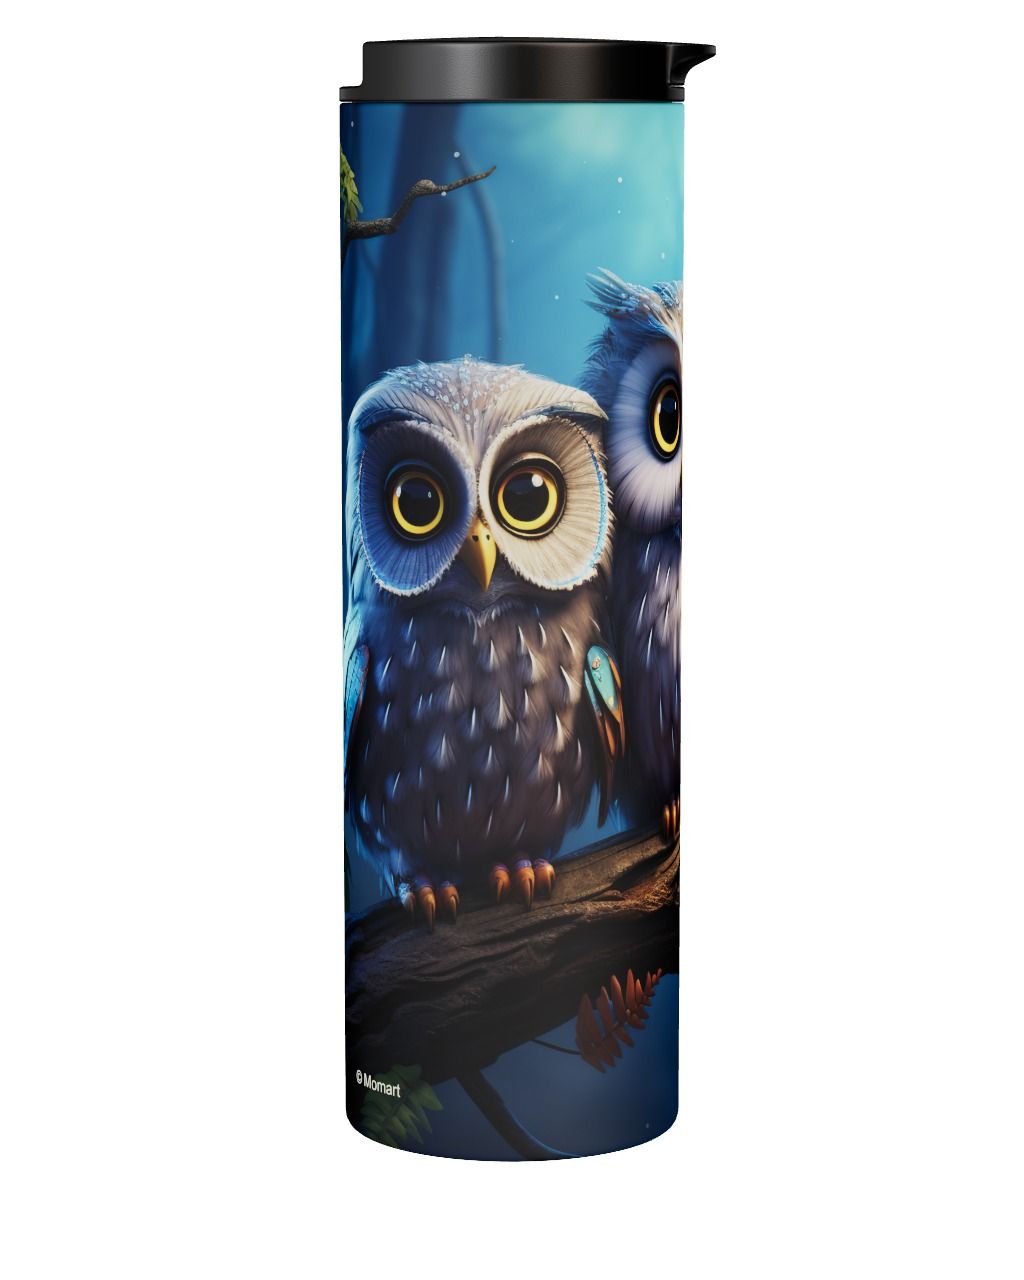 3 Owls On Branches by Momart, Tumbler